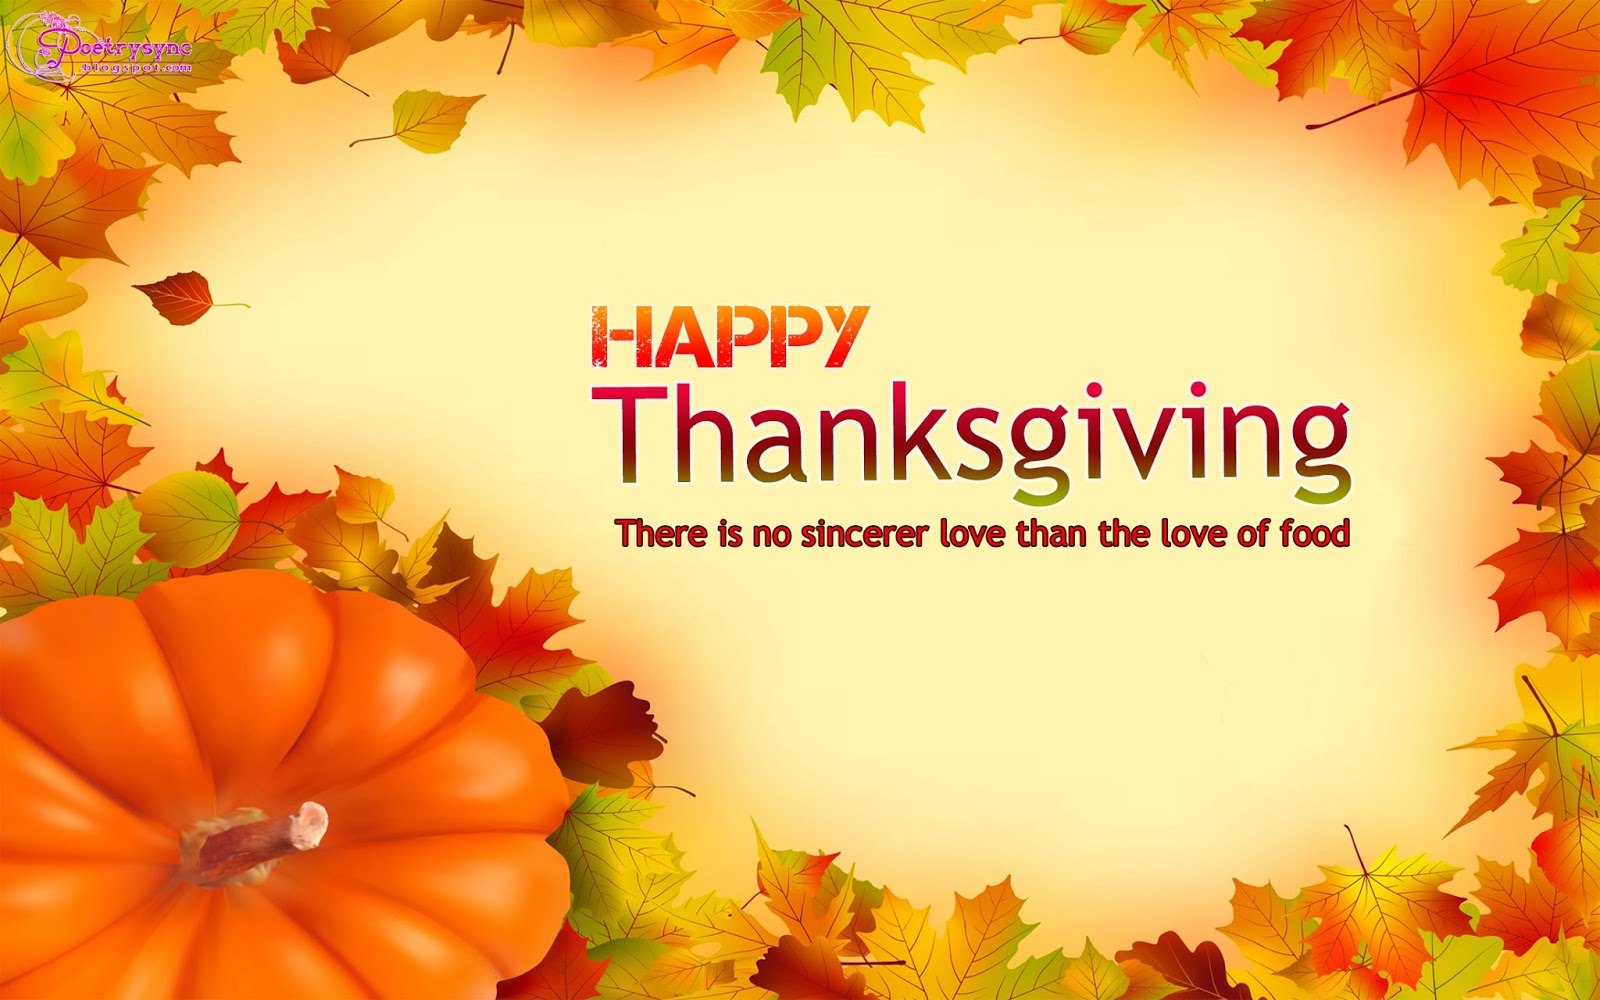 Thanksgiving Greetings Archives Happy Image